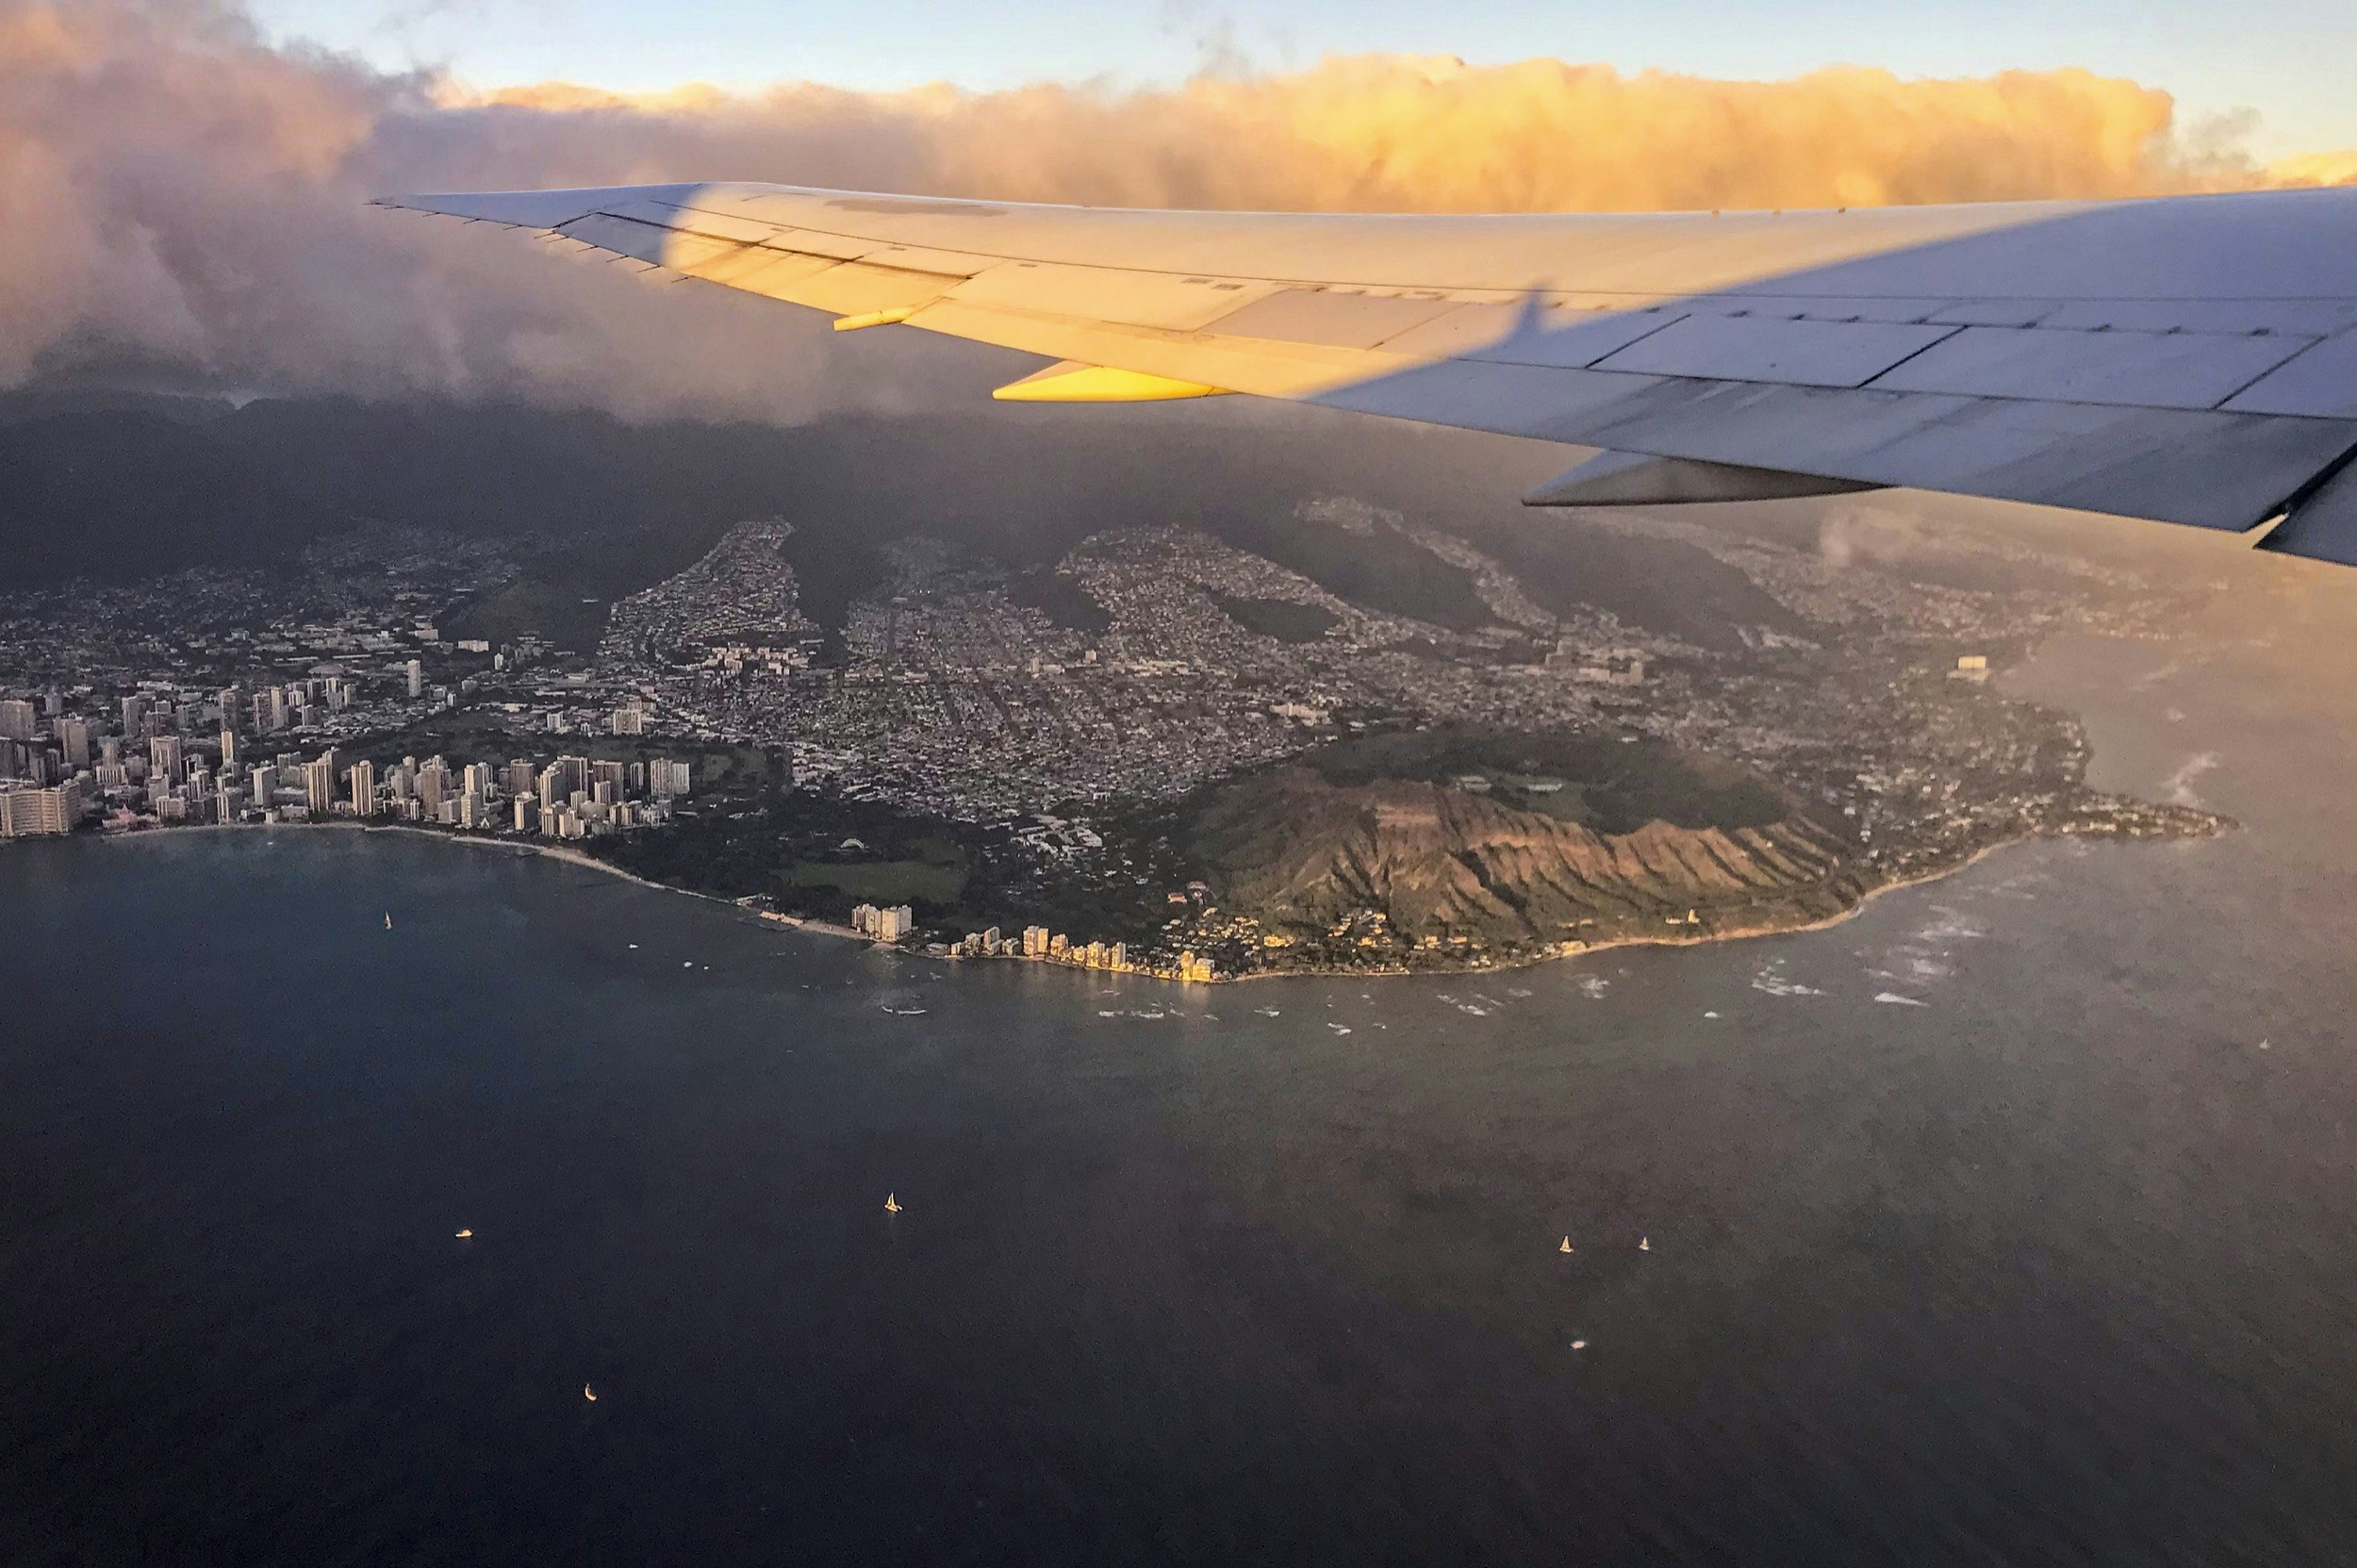 View of Diamond Head crater located on Oahu, Hawaii from airplane after takeoff